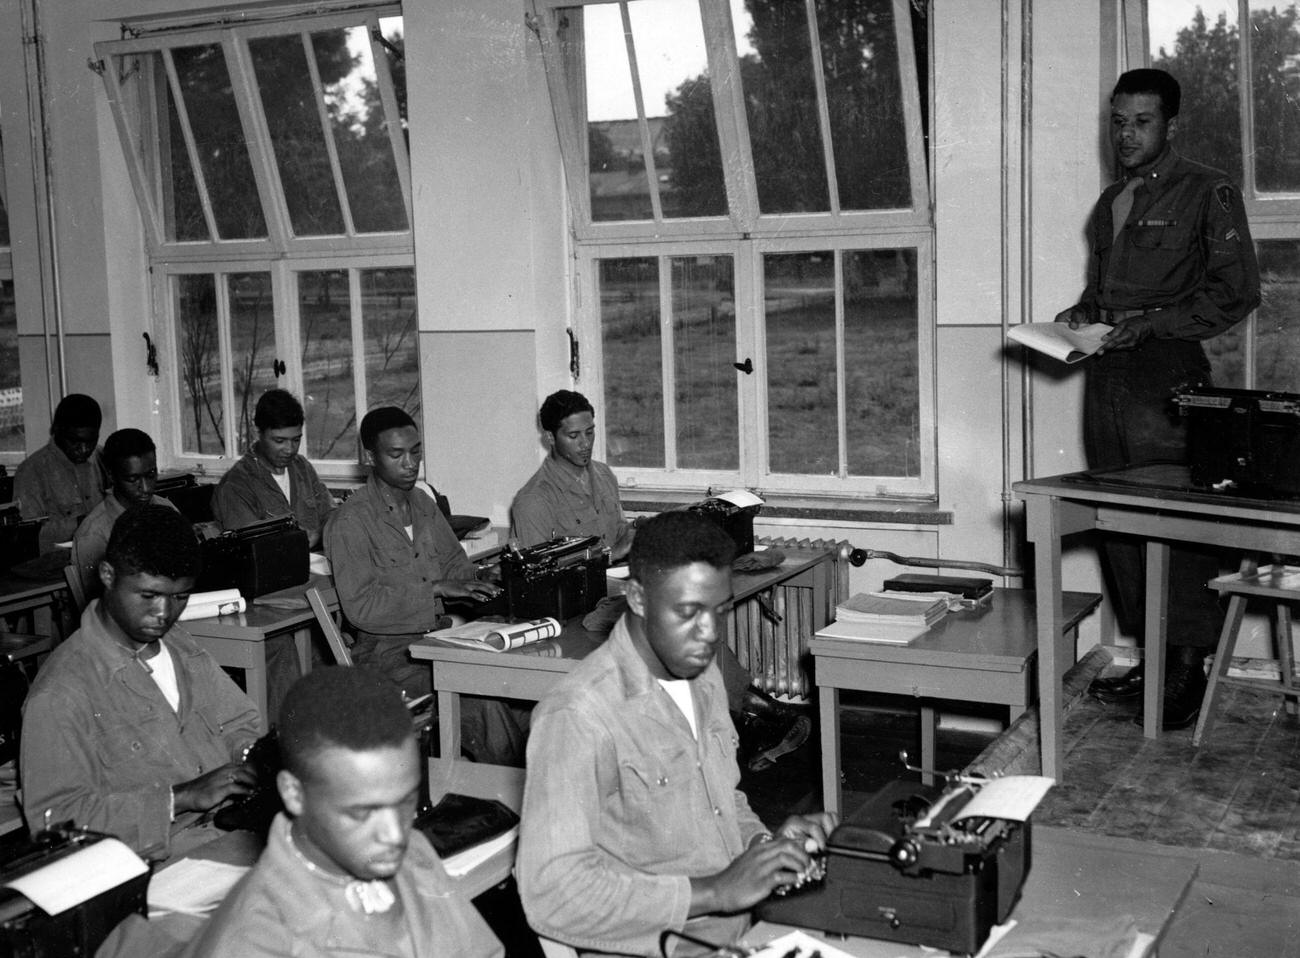 Cpl Jerret D May Instructing a Typing Class, Kitzingen, Germany, 1949